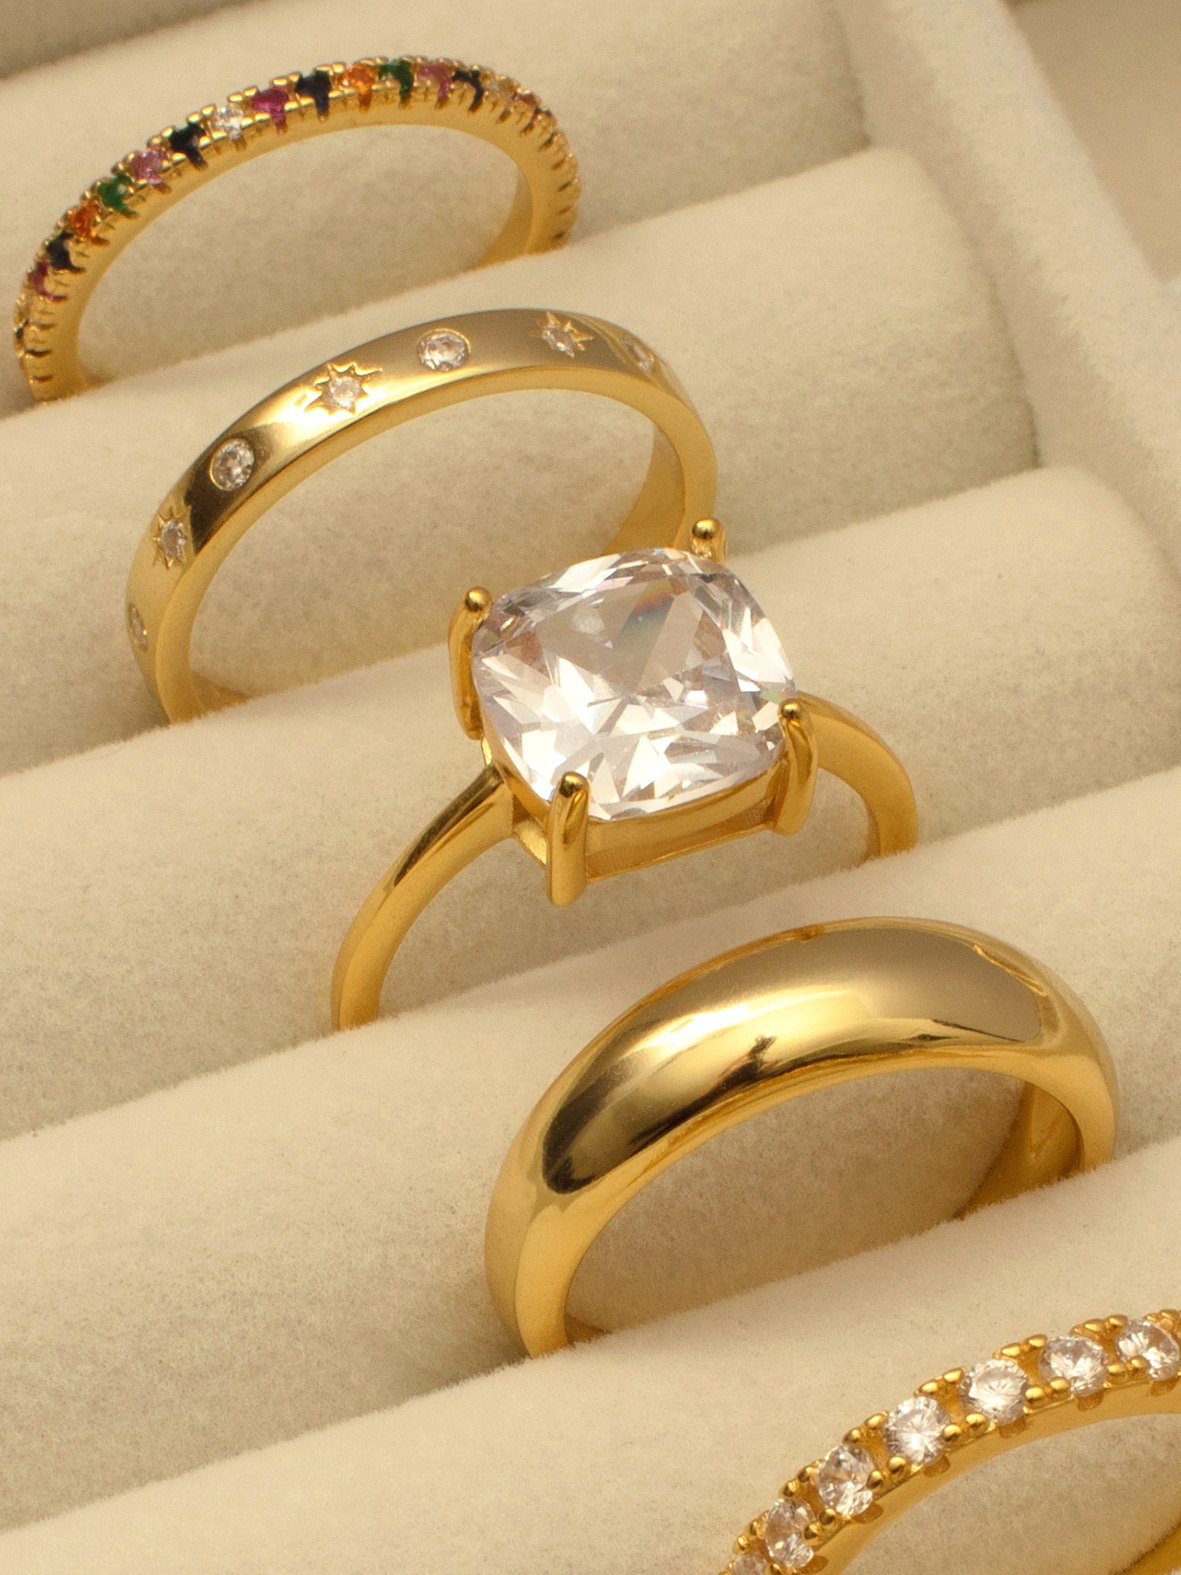 Gold ring with a square stone, next to various other rings.